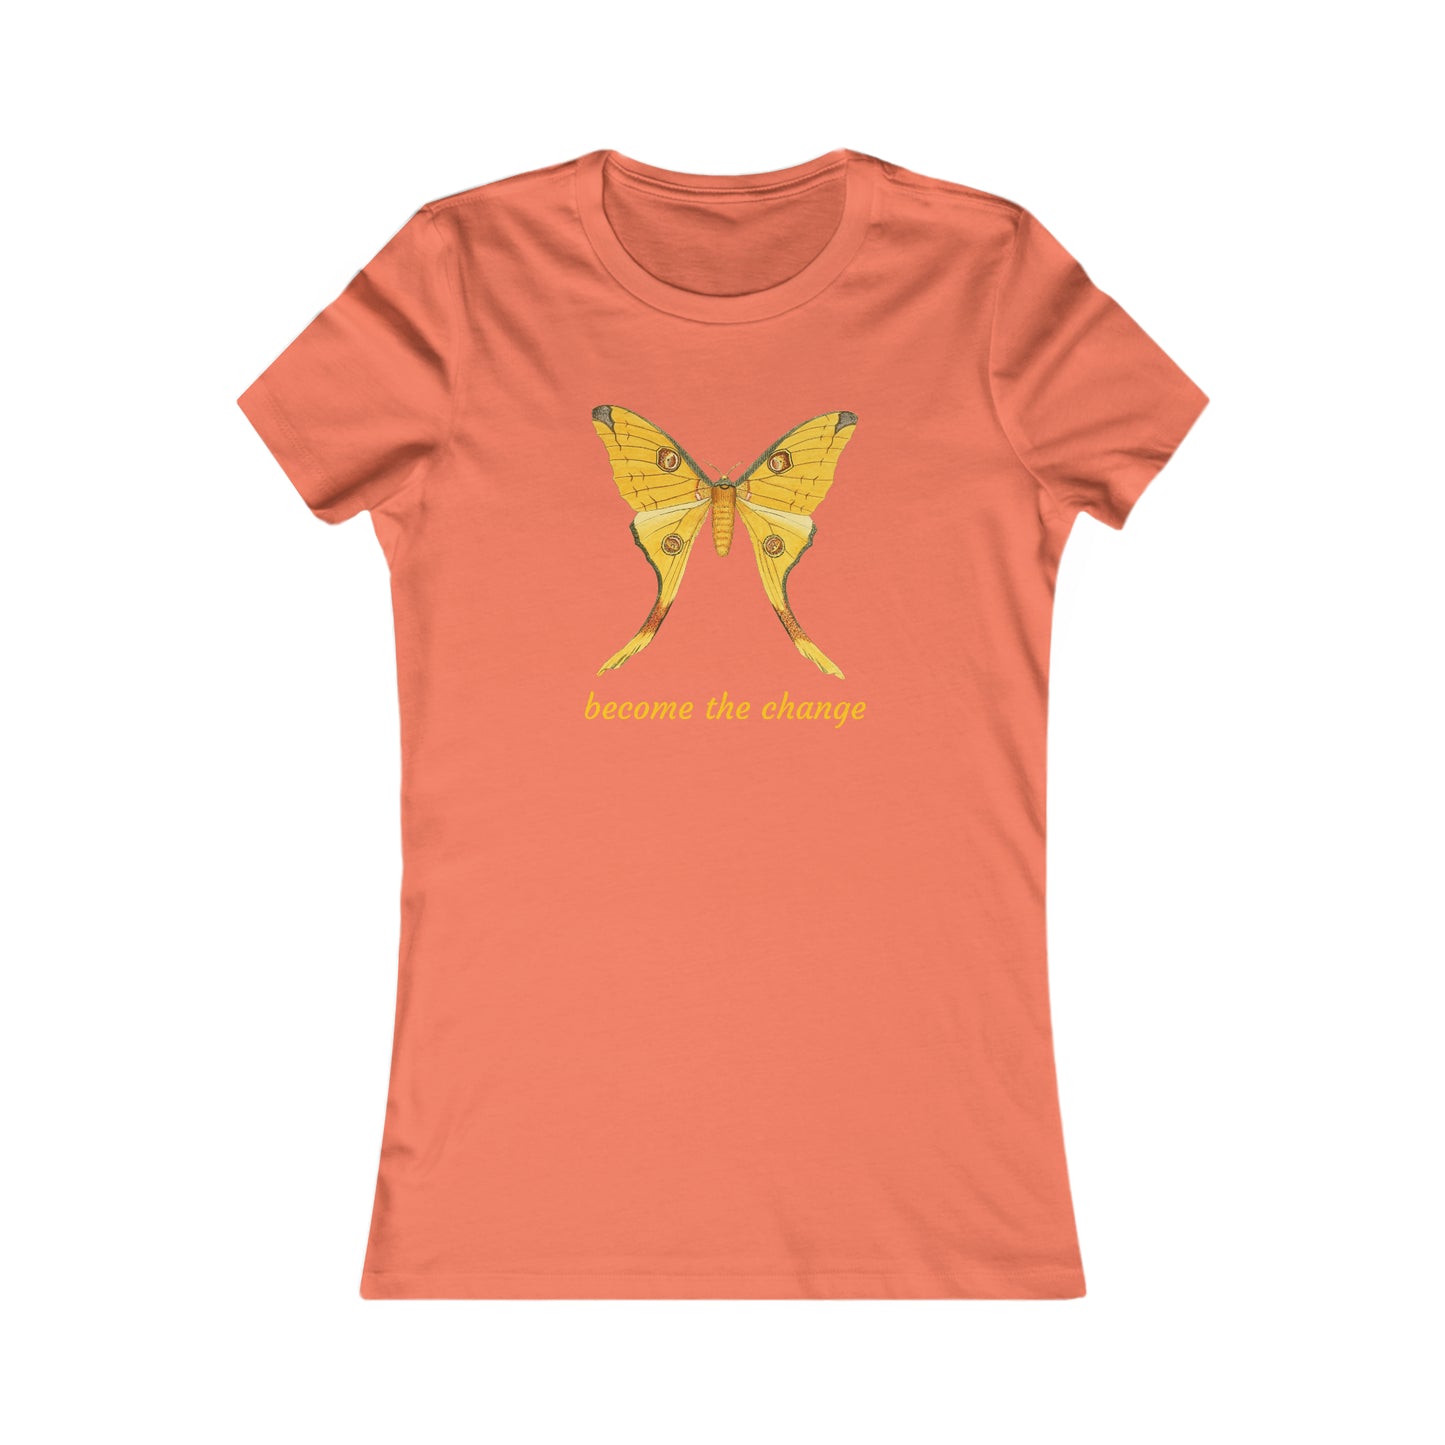 A beautiful butterfly with “become the change” message on this Women's Favorite Tee. Slim fit so please check the size table.